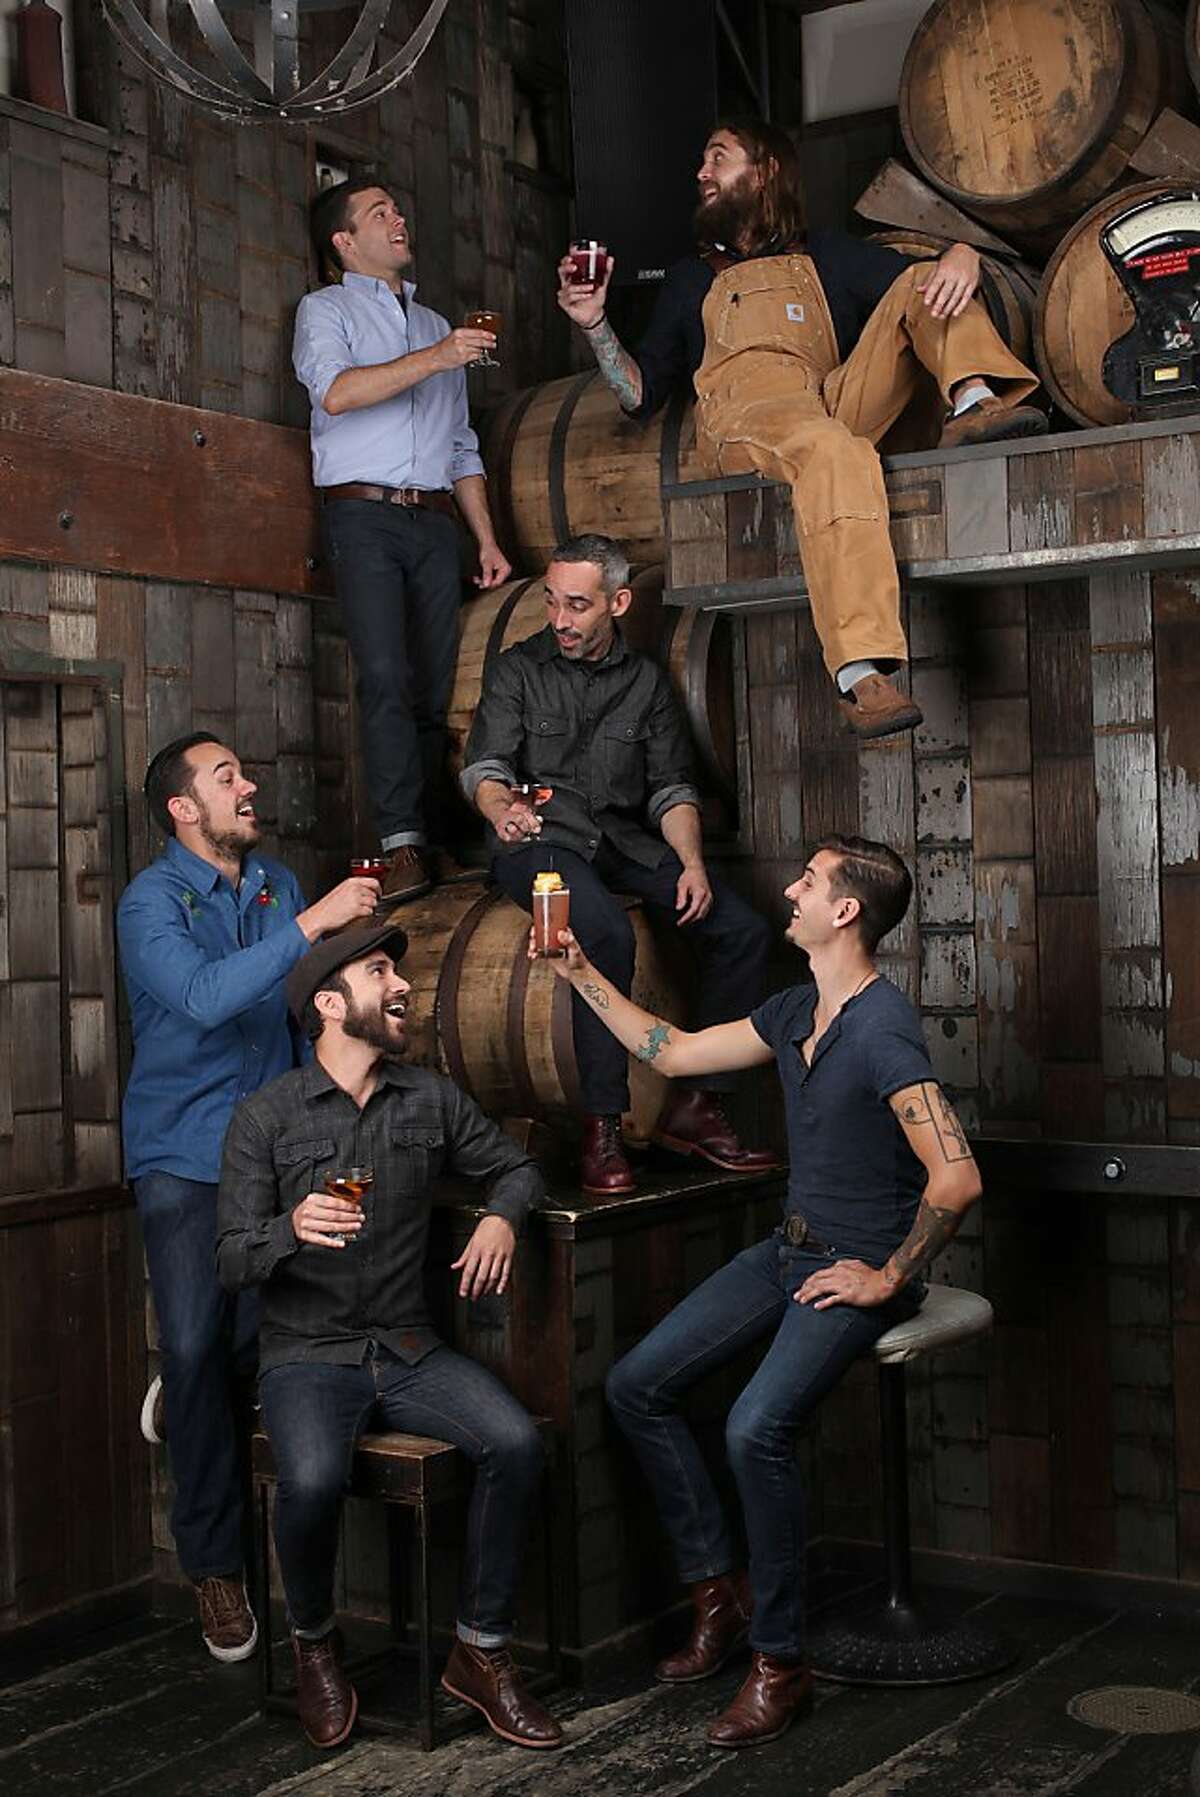 Clockwise from top left--Bartenders Michael Lay, Matthew Campbell (tan overalls), Chris Lane (lower right), Dan Stahl (seated left), Lucien Sankey, and Matty Conway (middle seated on barrel) photographed at Rickhouse in San Francisco, Calif., on Tuesday, August 13, 2013.